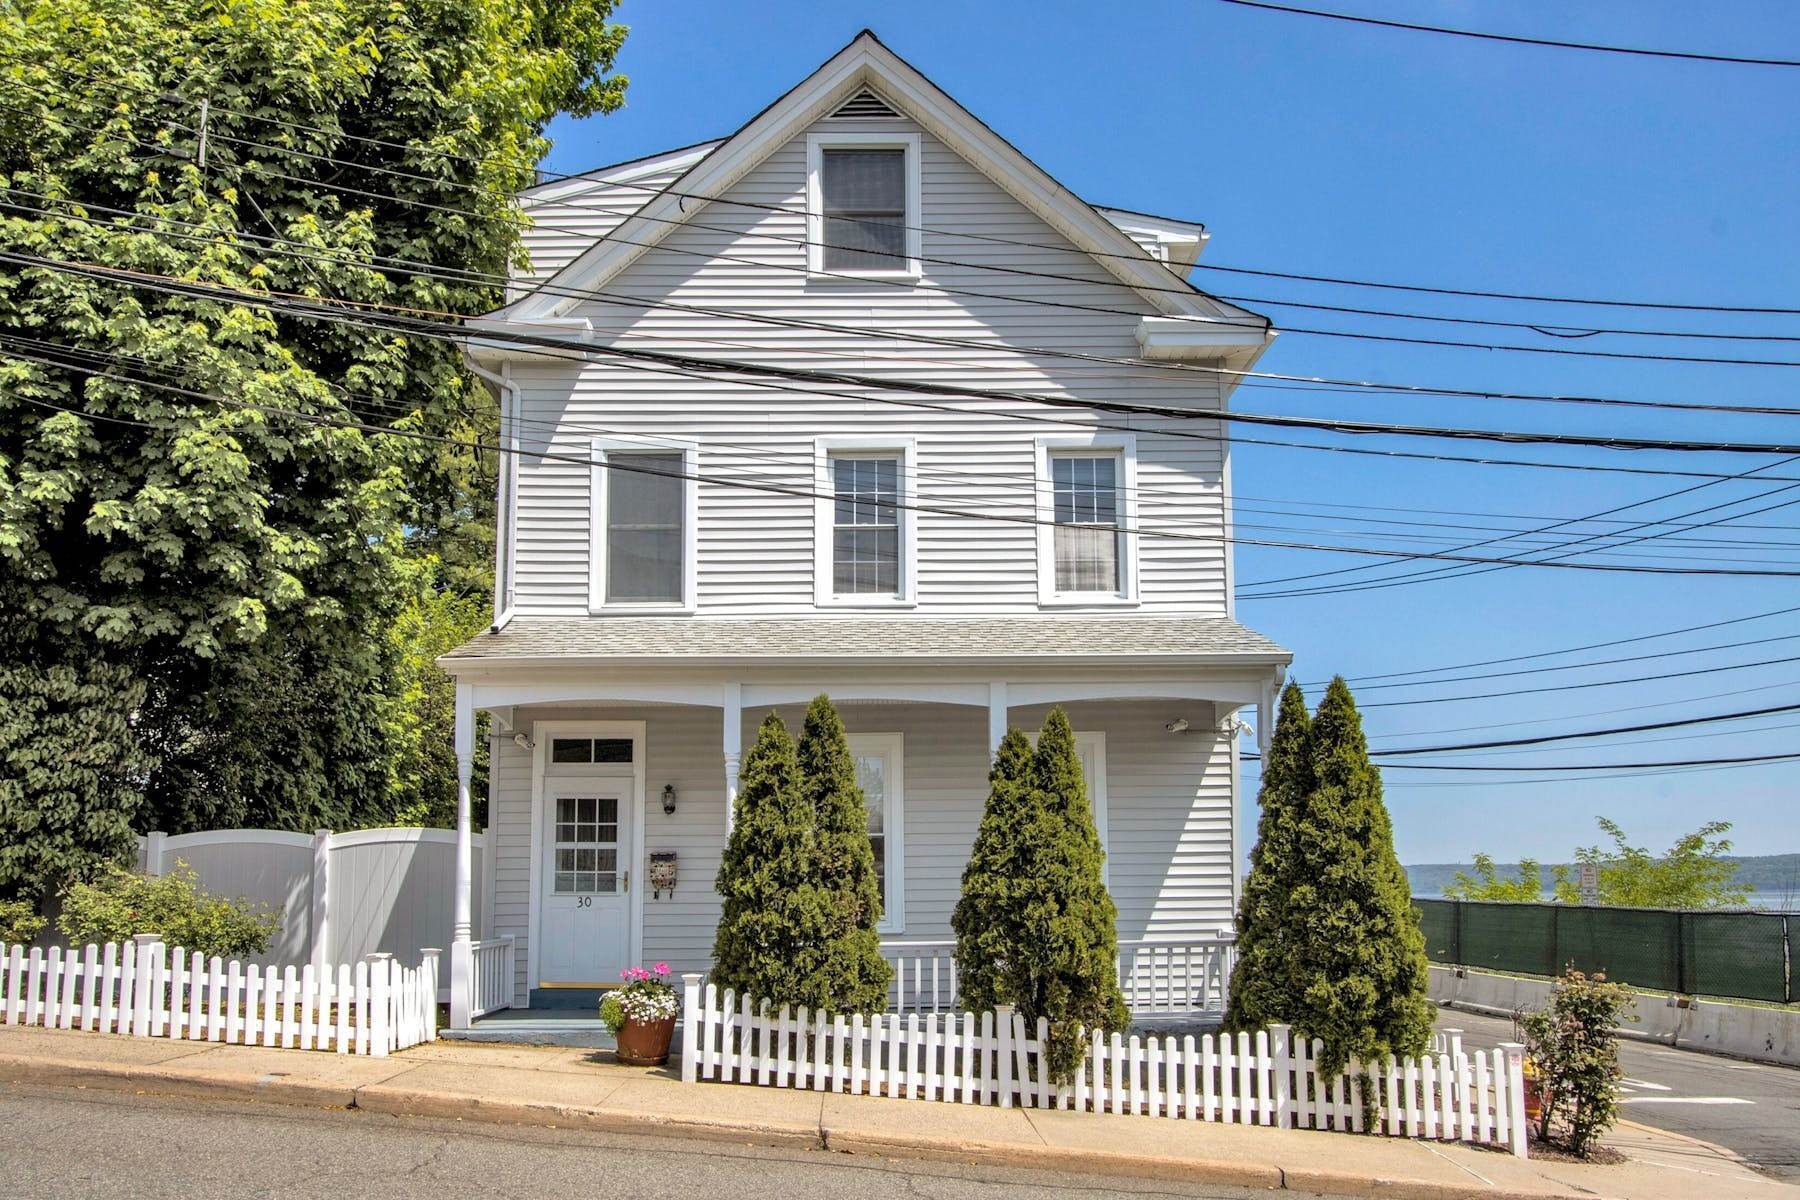 Single Family Homes for Sale at Village Colonial 30 Main Street Nyack, New York 10960 United States